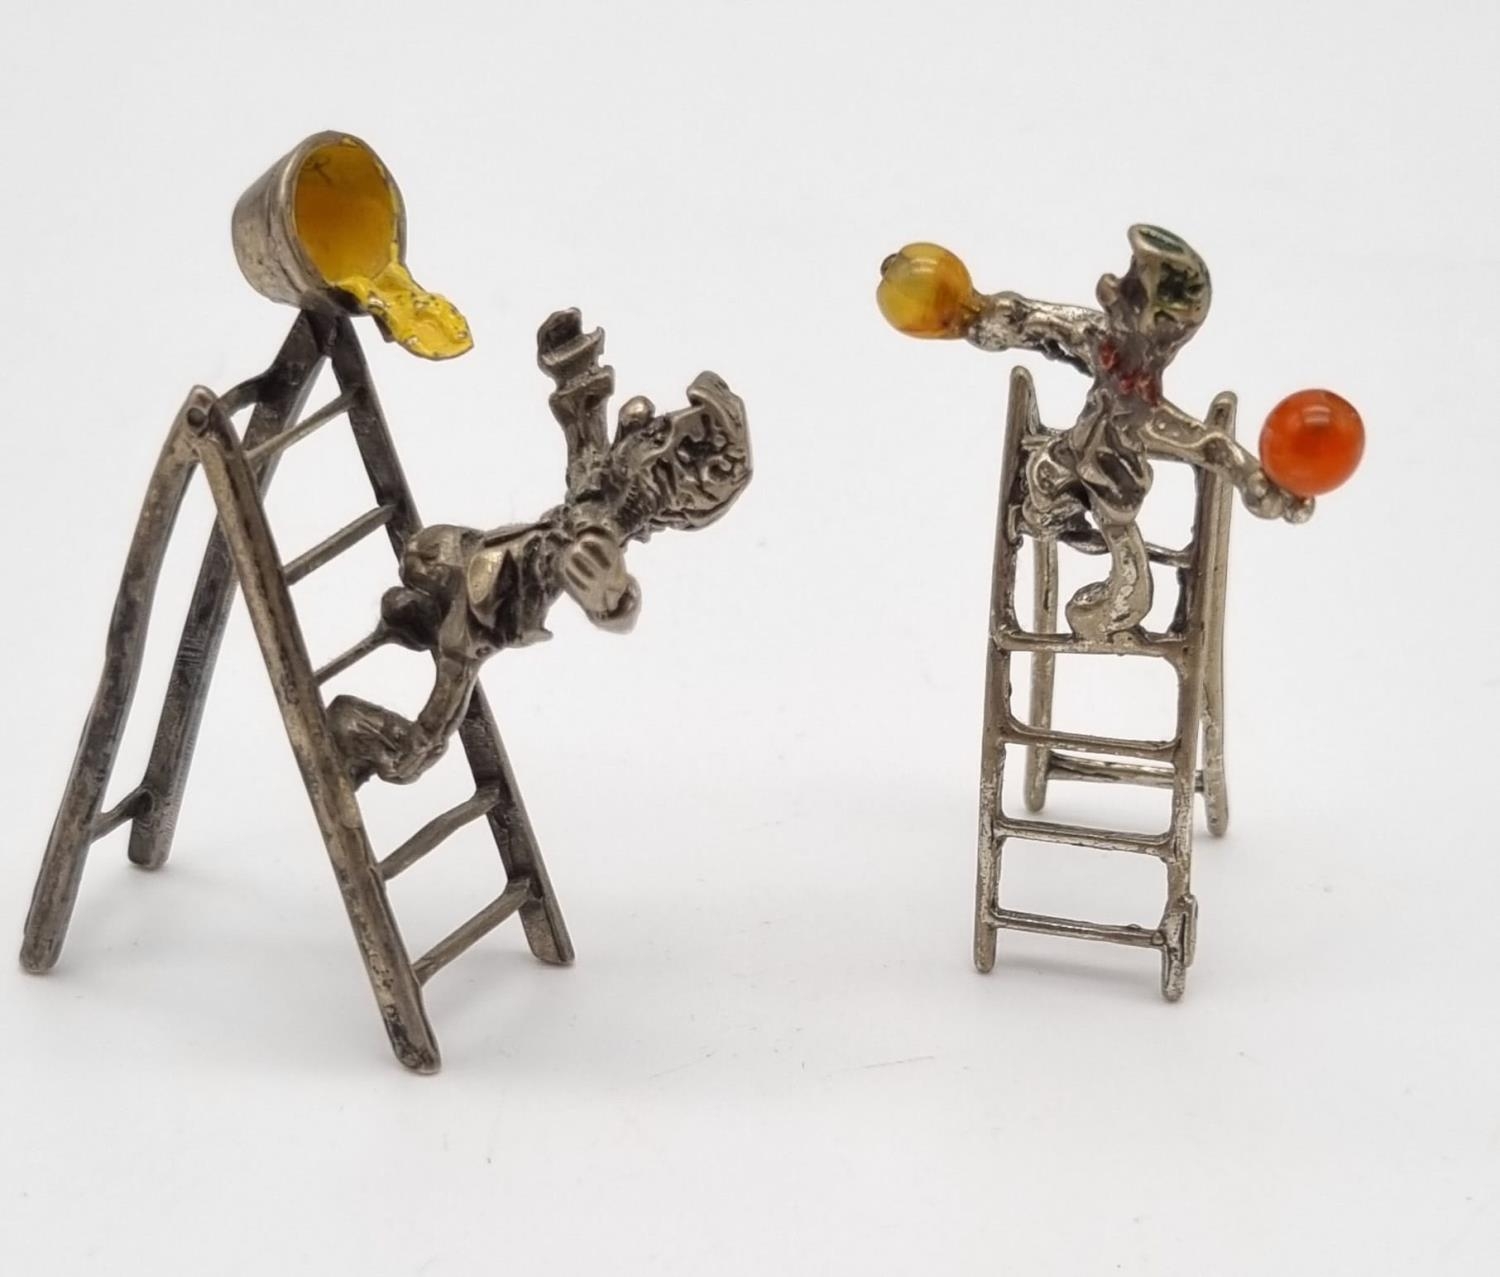 Six Vintage Silver and Enamel Italian Clown Figurines in Various Activities. 77g total weight. - Image 5 of 9